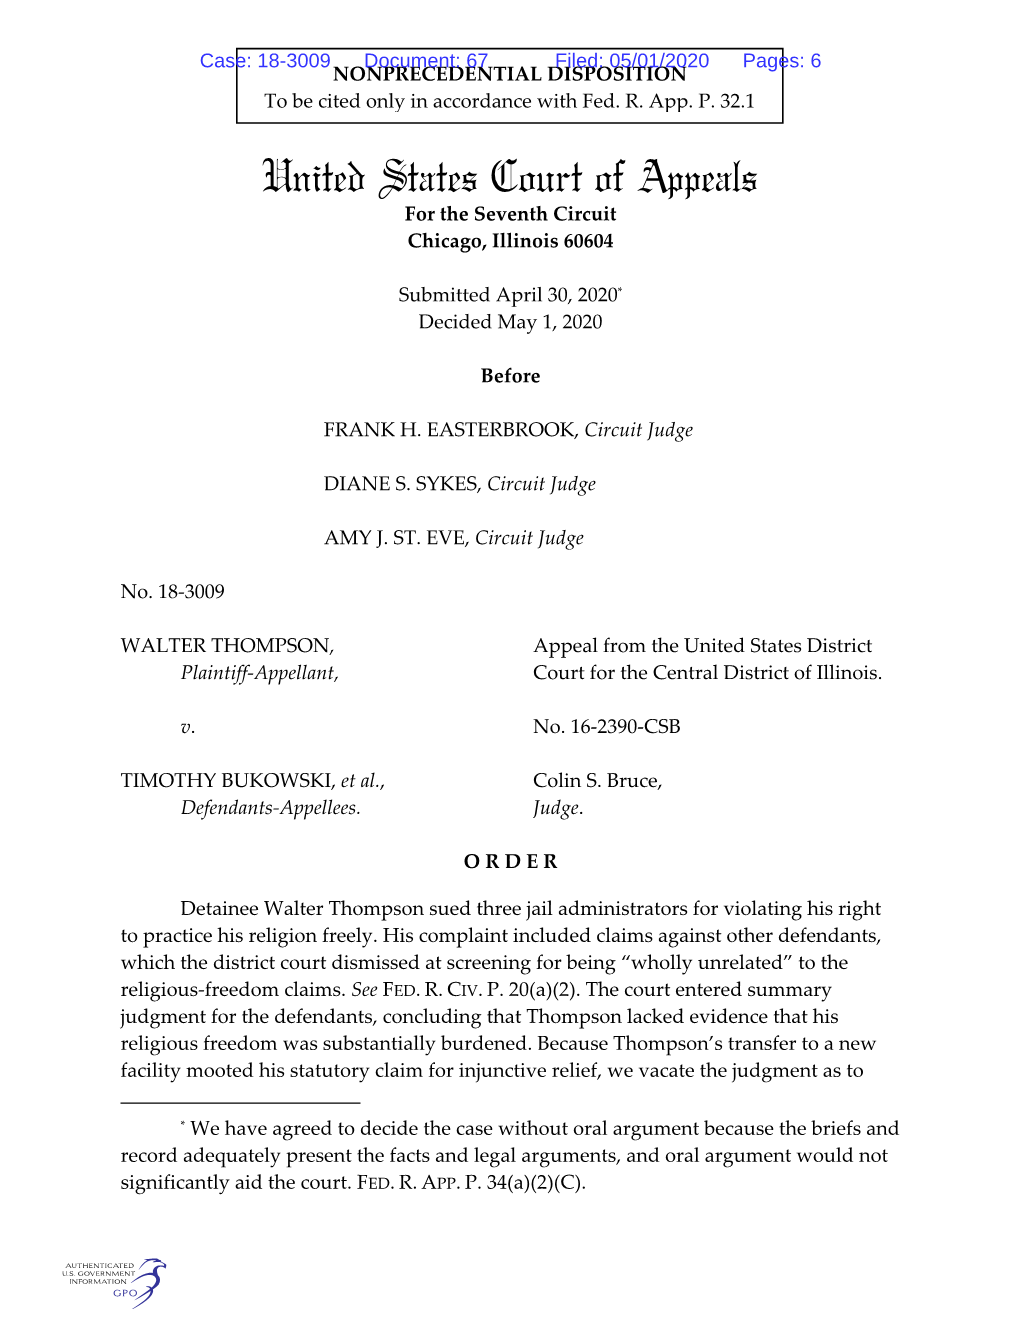 United States Court of Appeals for the Seventh Circuit Chicago, Illinois 60604